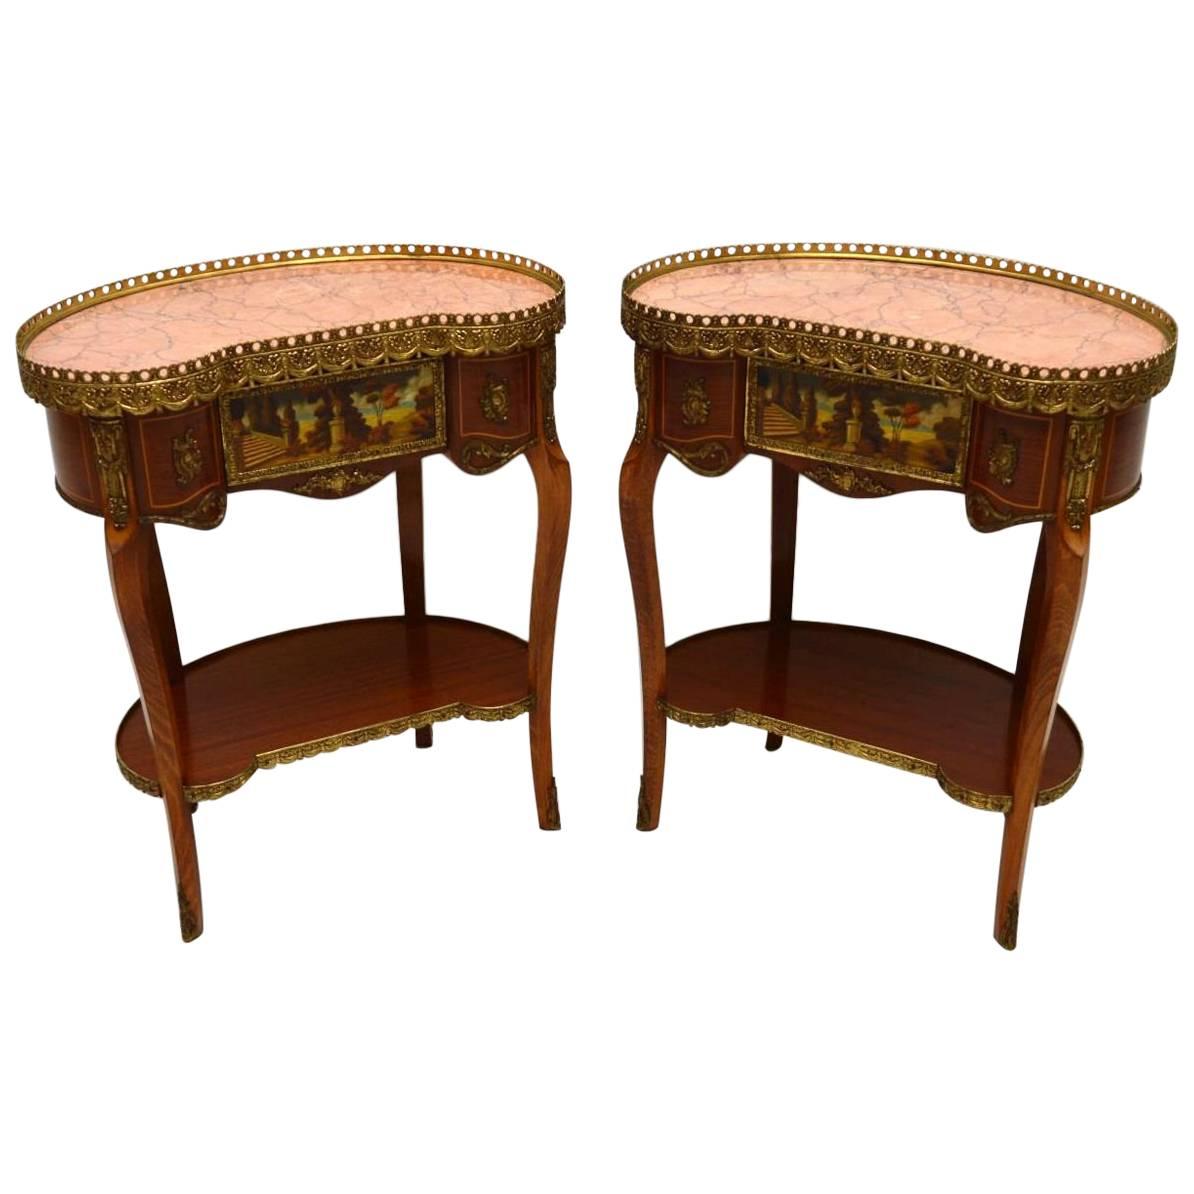 Pair of Antique French Style Marble-Top Side Tables